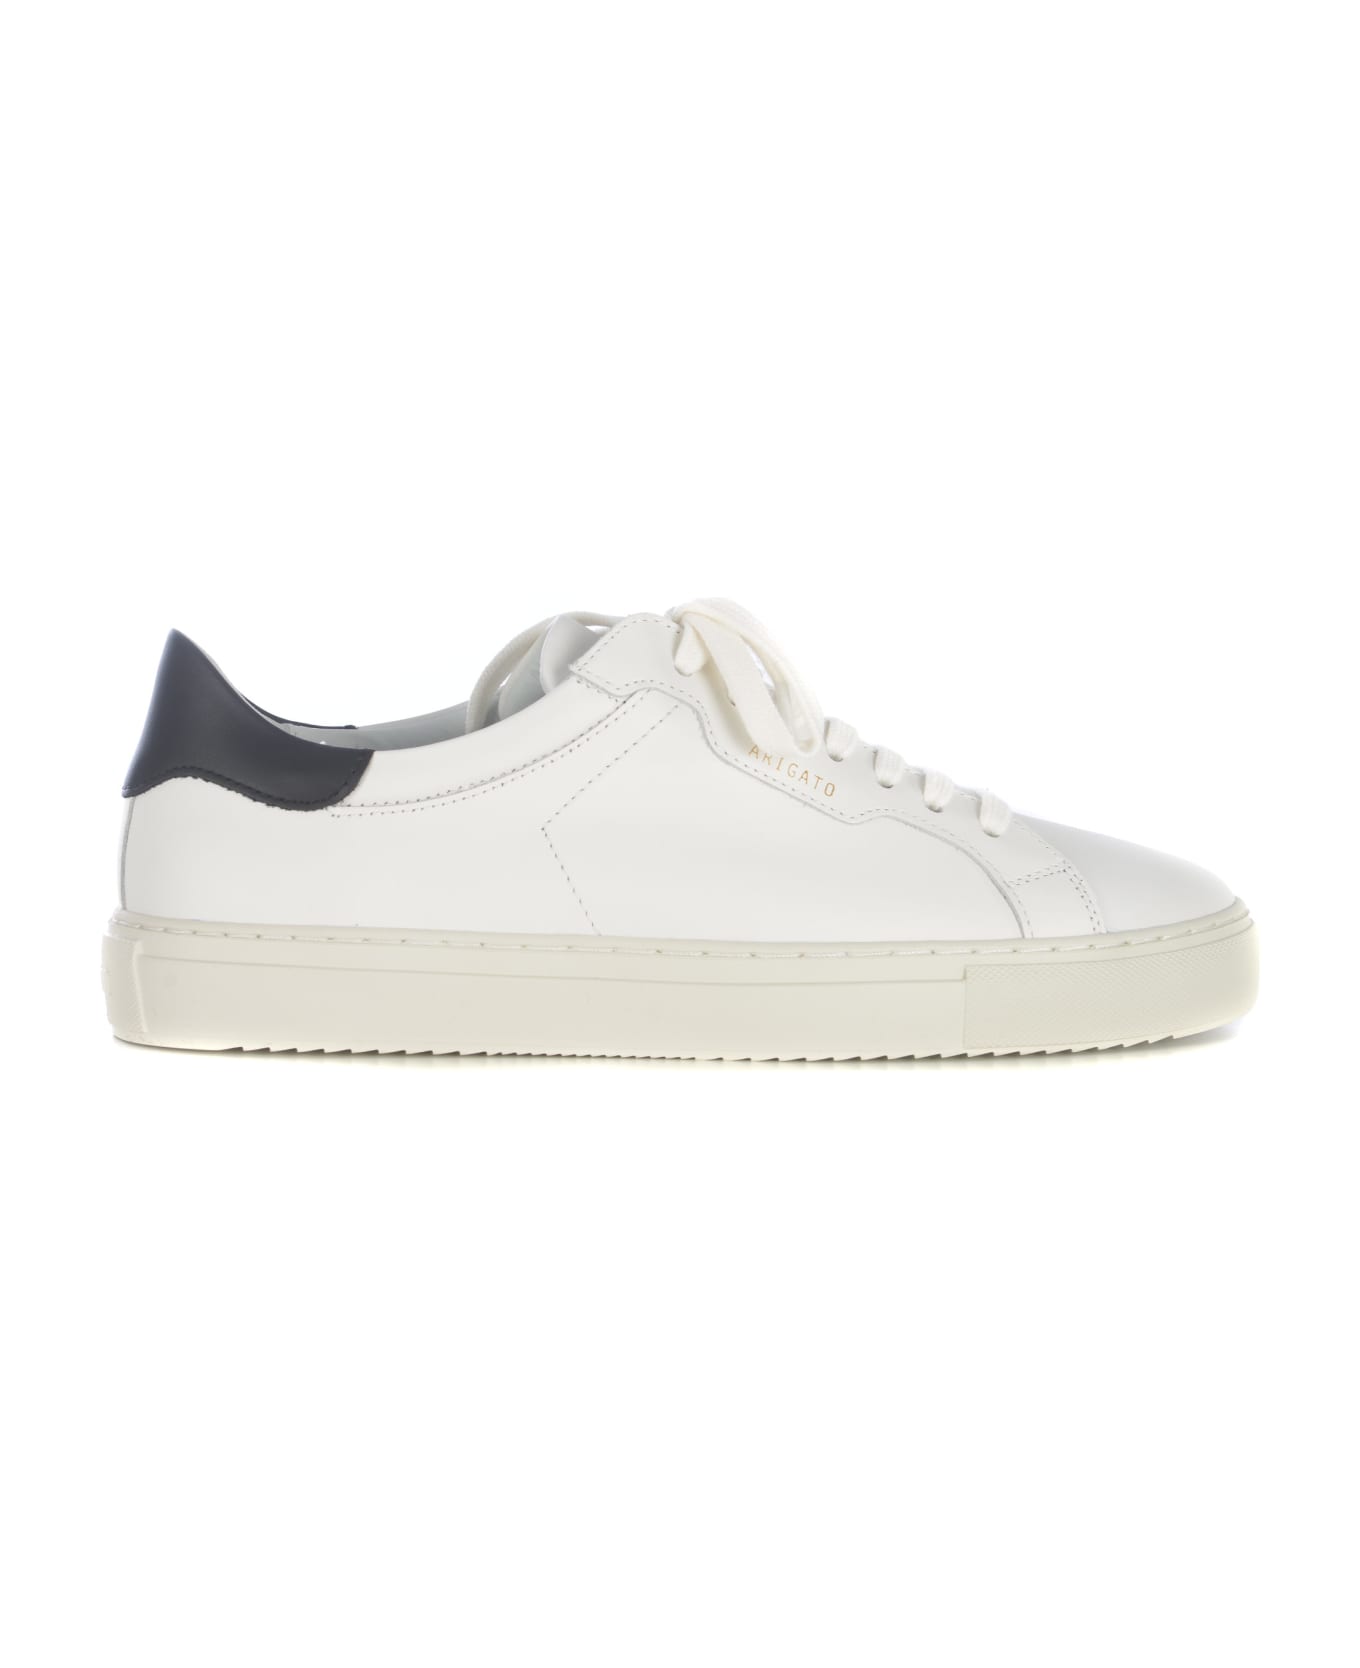 Axel Arigato Sneakers Axel Arigato "clean 180" In Leather - Bianco